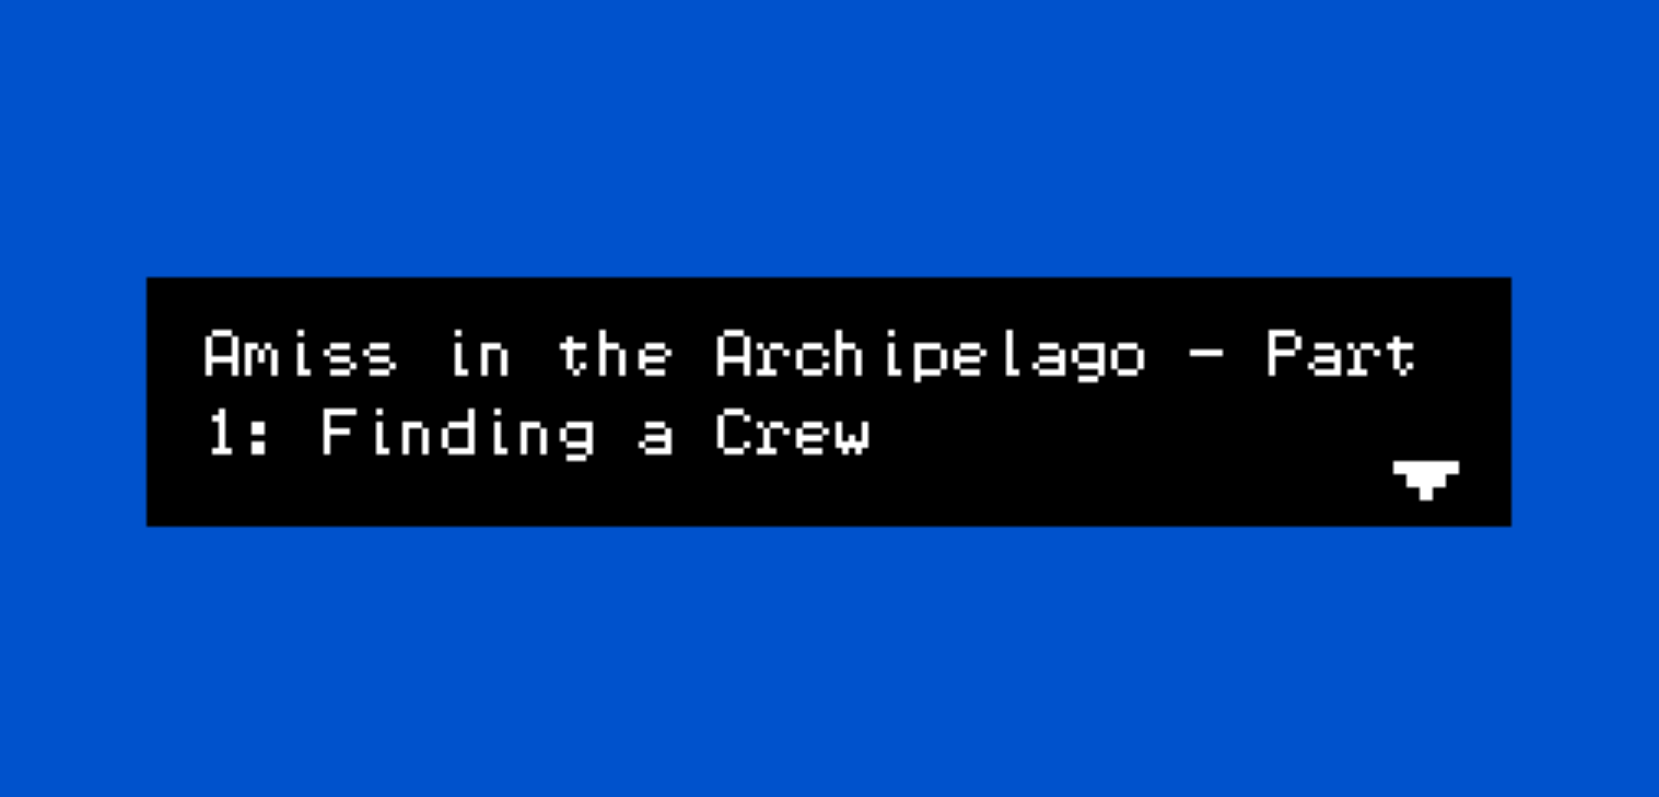 Amiss in the Archipelago - Part 1: Finding a Crew